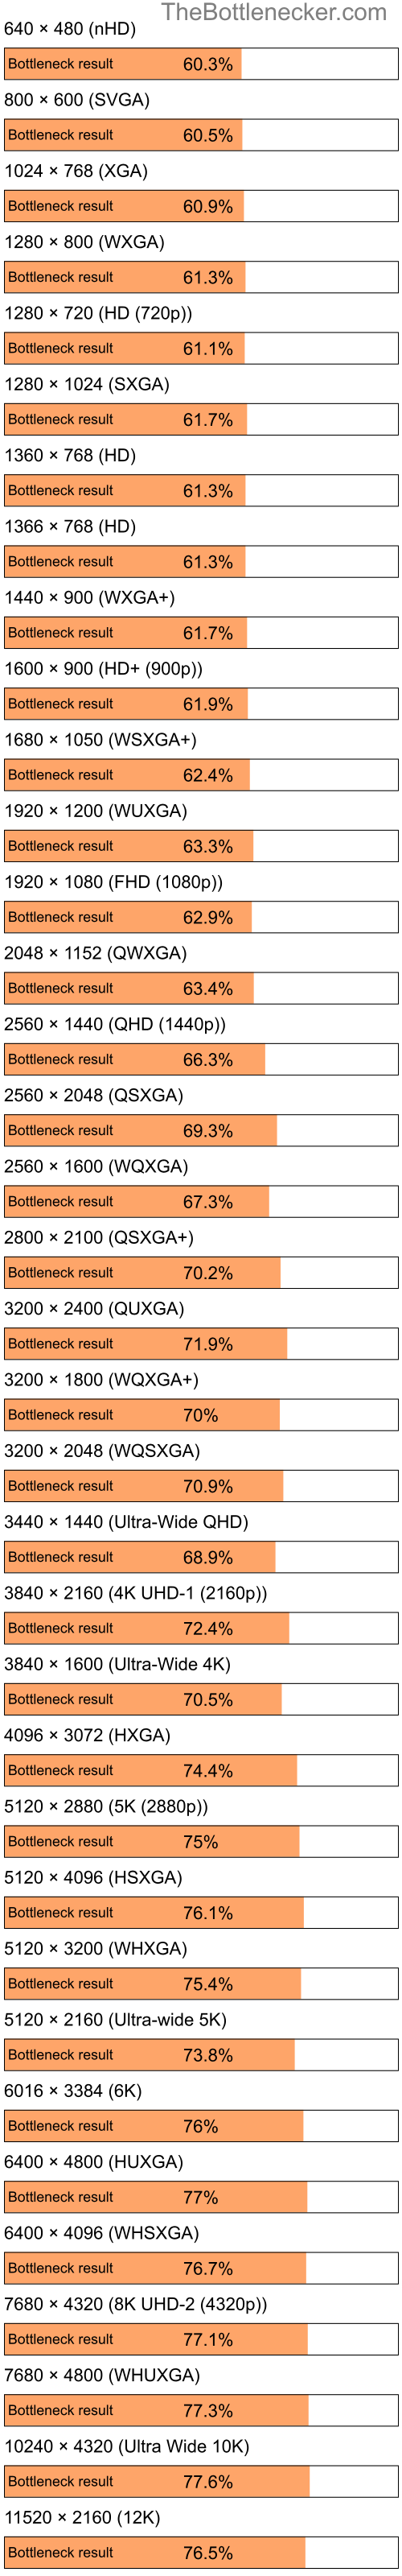 Bottleneck results by resolution for Intel Pentium 4 and AMD Mobility Radeon HD 3430 in7 Days to Die